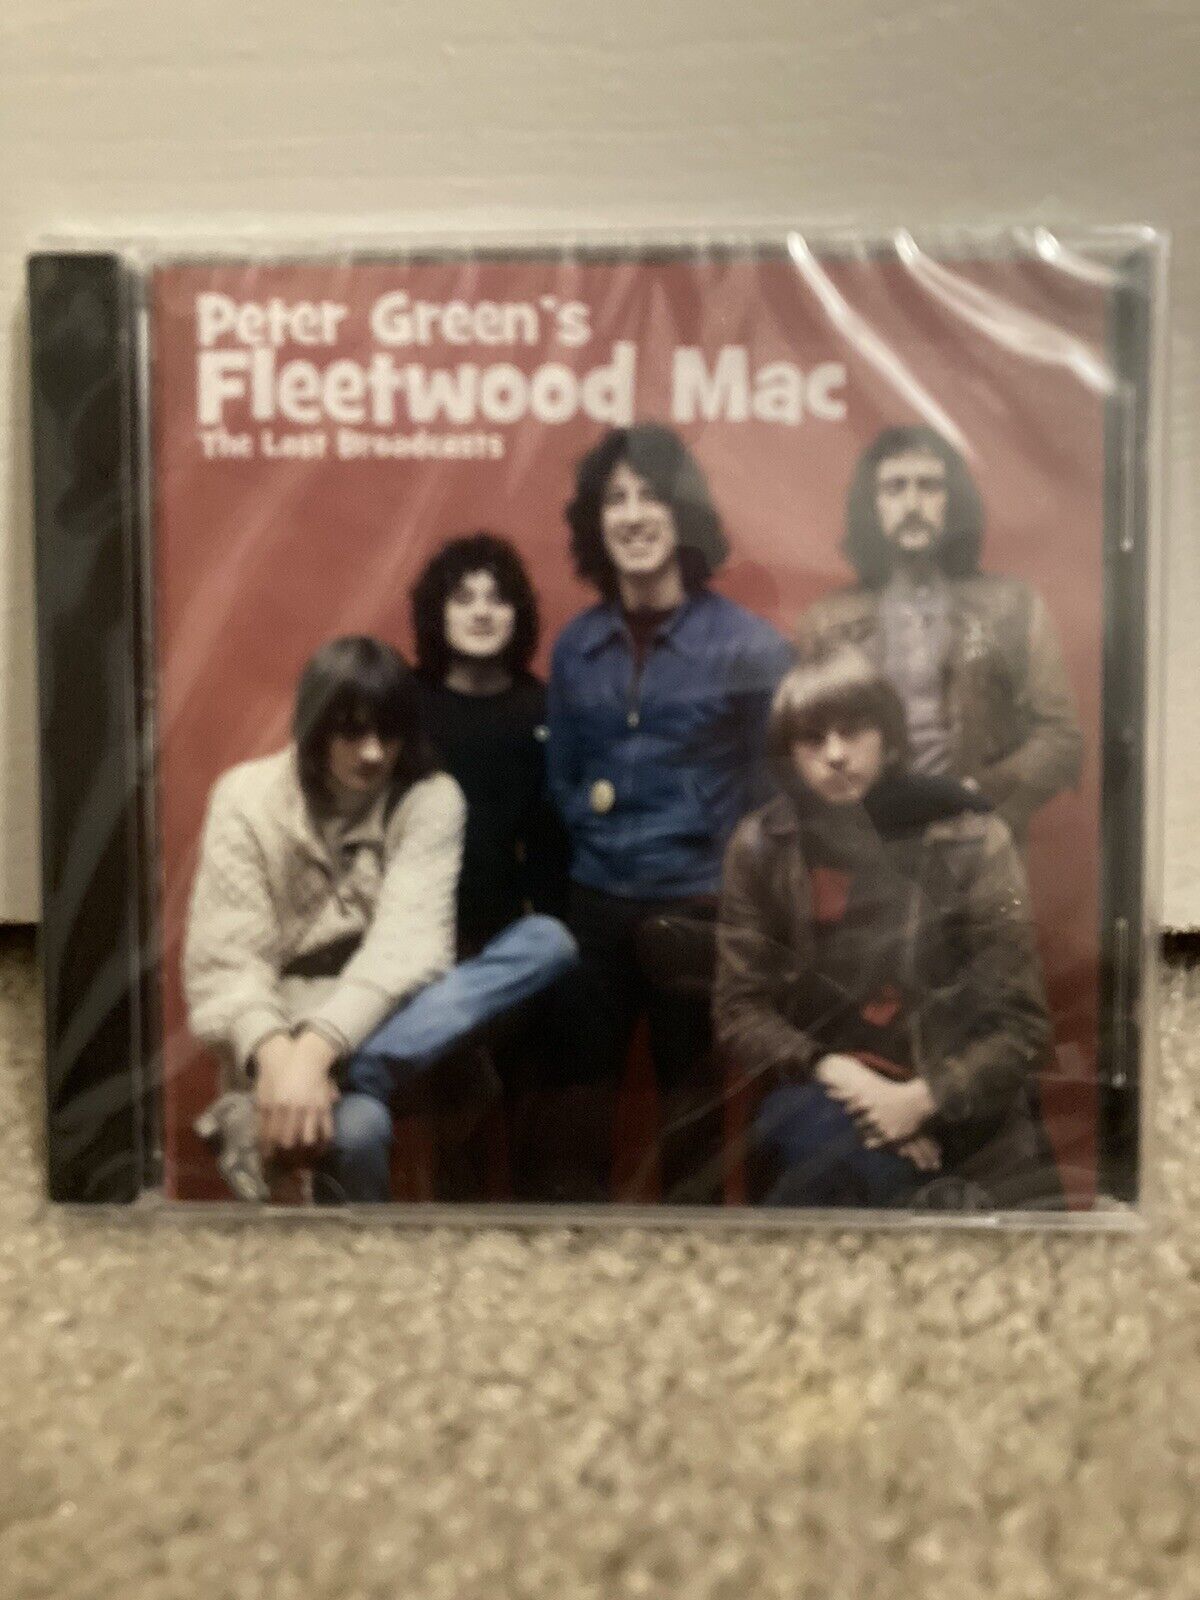 Peter Green’s Fleetwood Mac - The Lost Broadcasts 1-CD 2019 Sealed